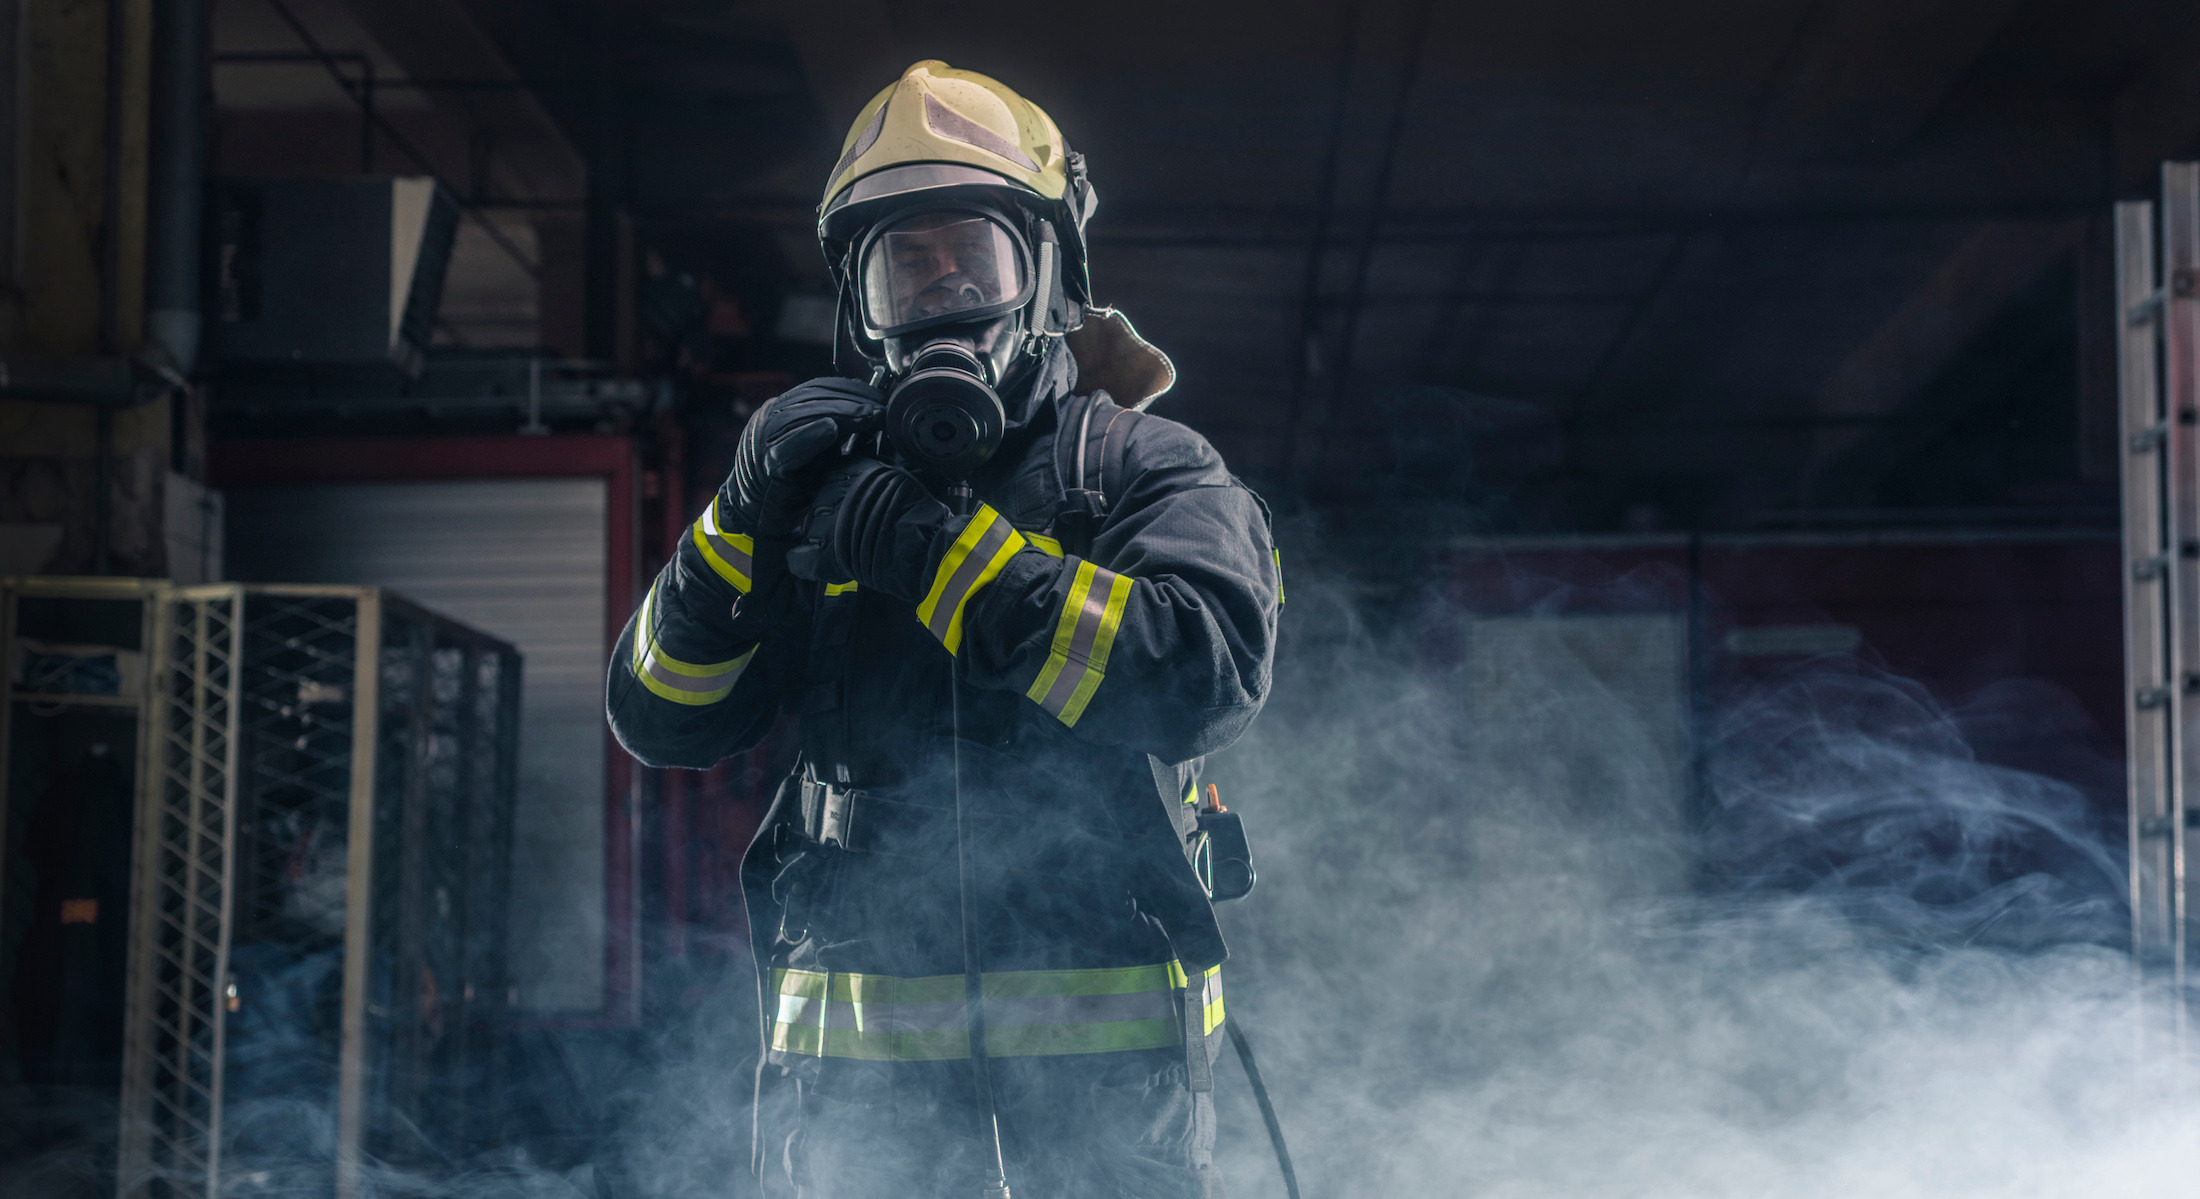 A firefighter in a smoke filled warehouse